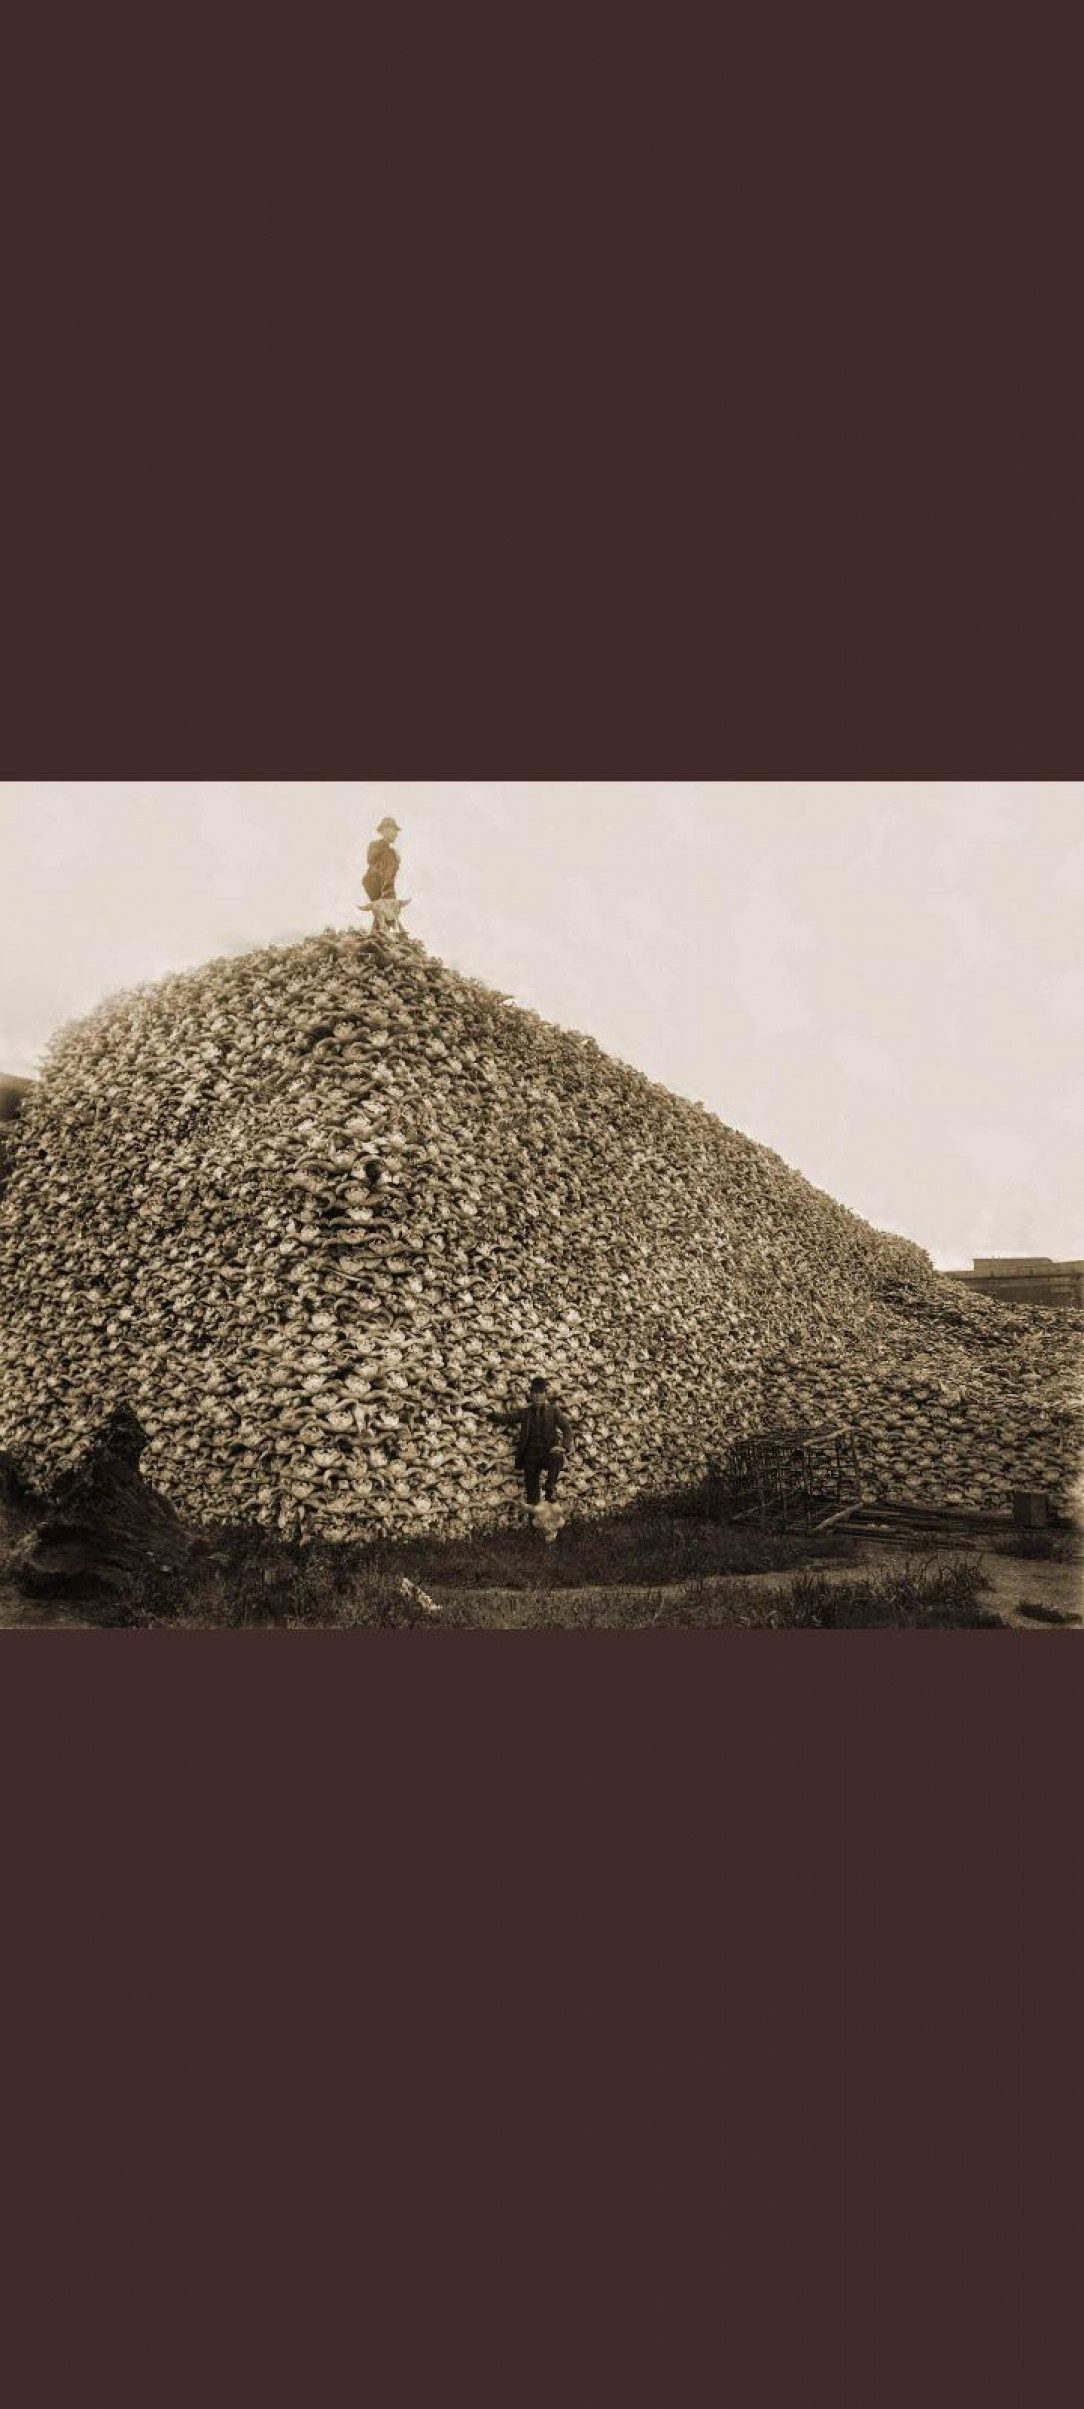 A mountain of American Bison skulls after being hunted to the brink of extinction in the 1800s